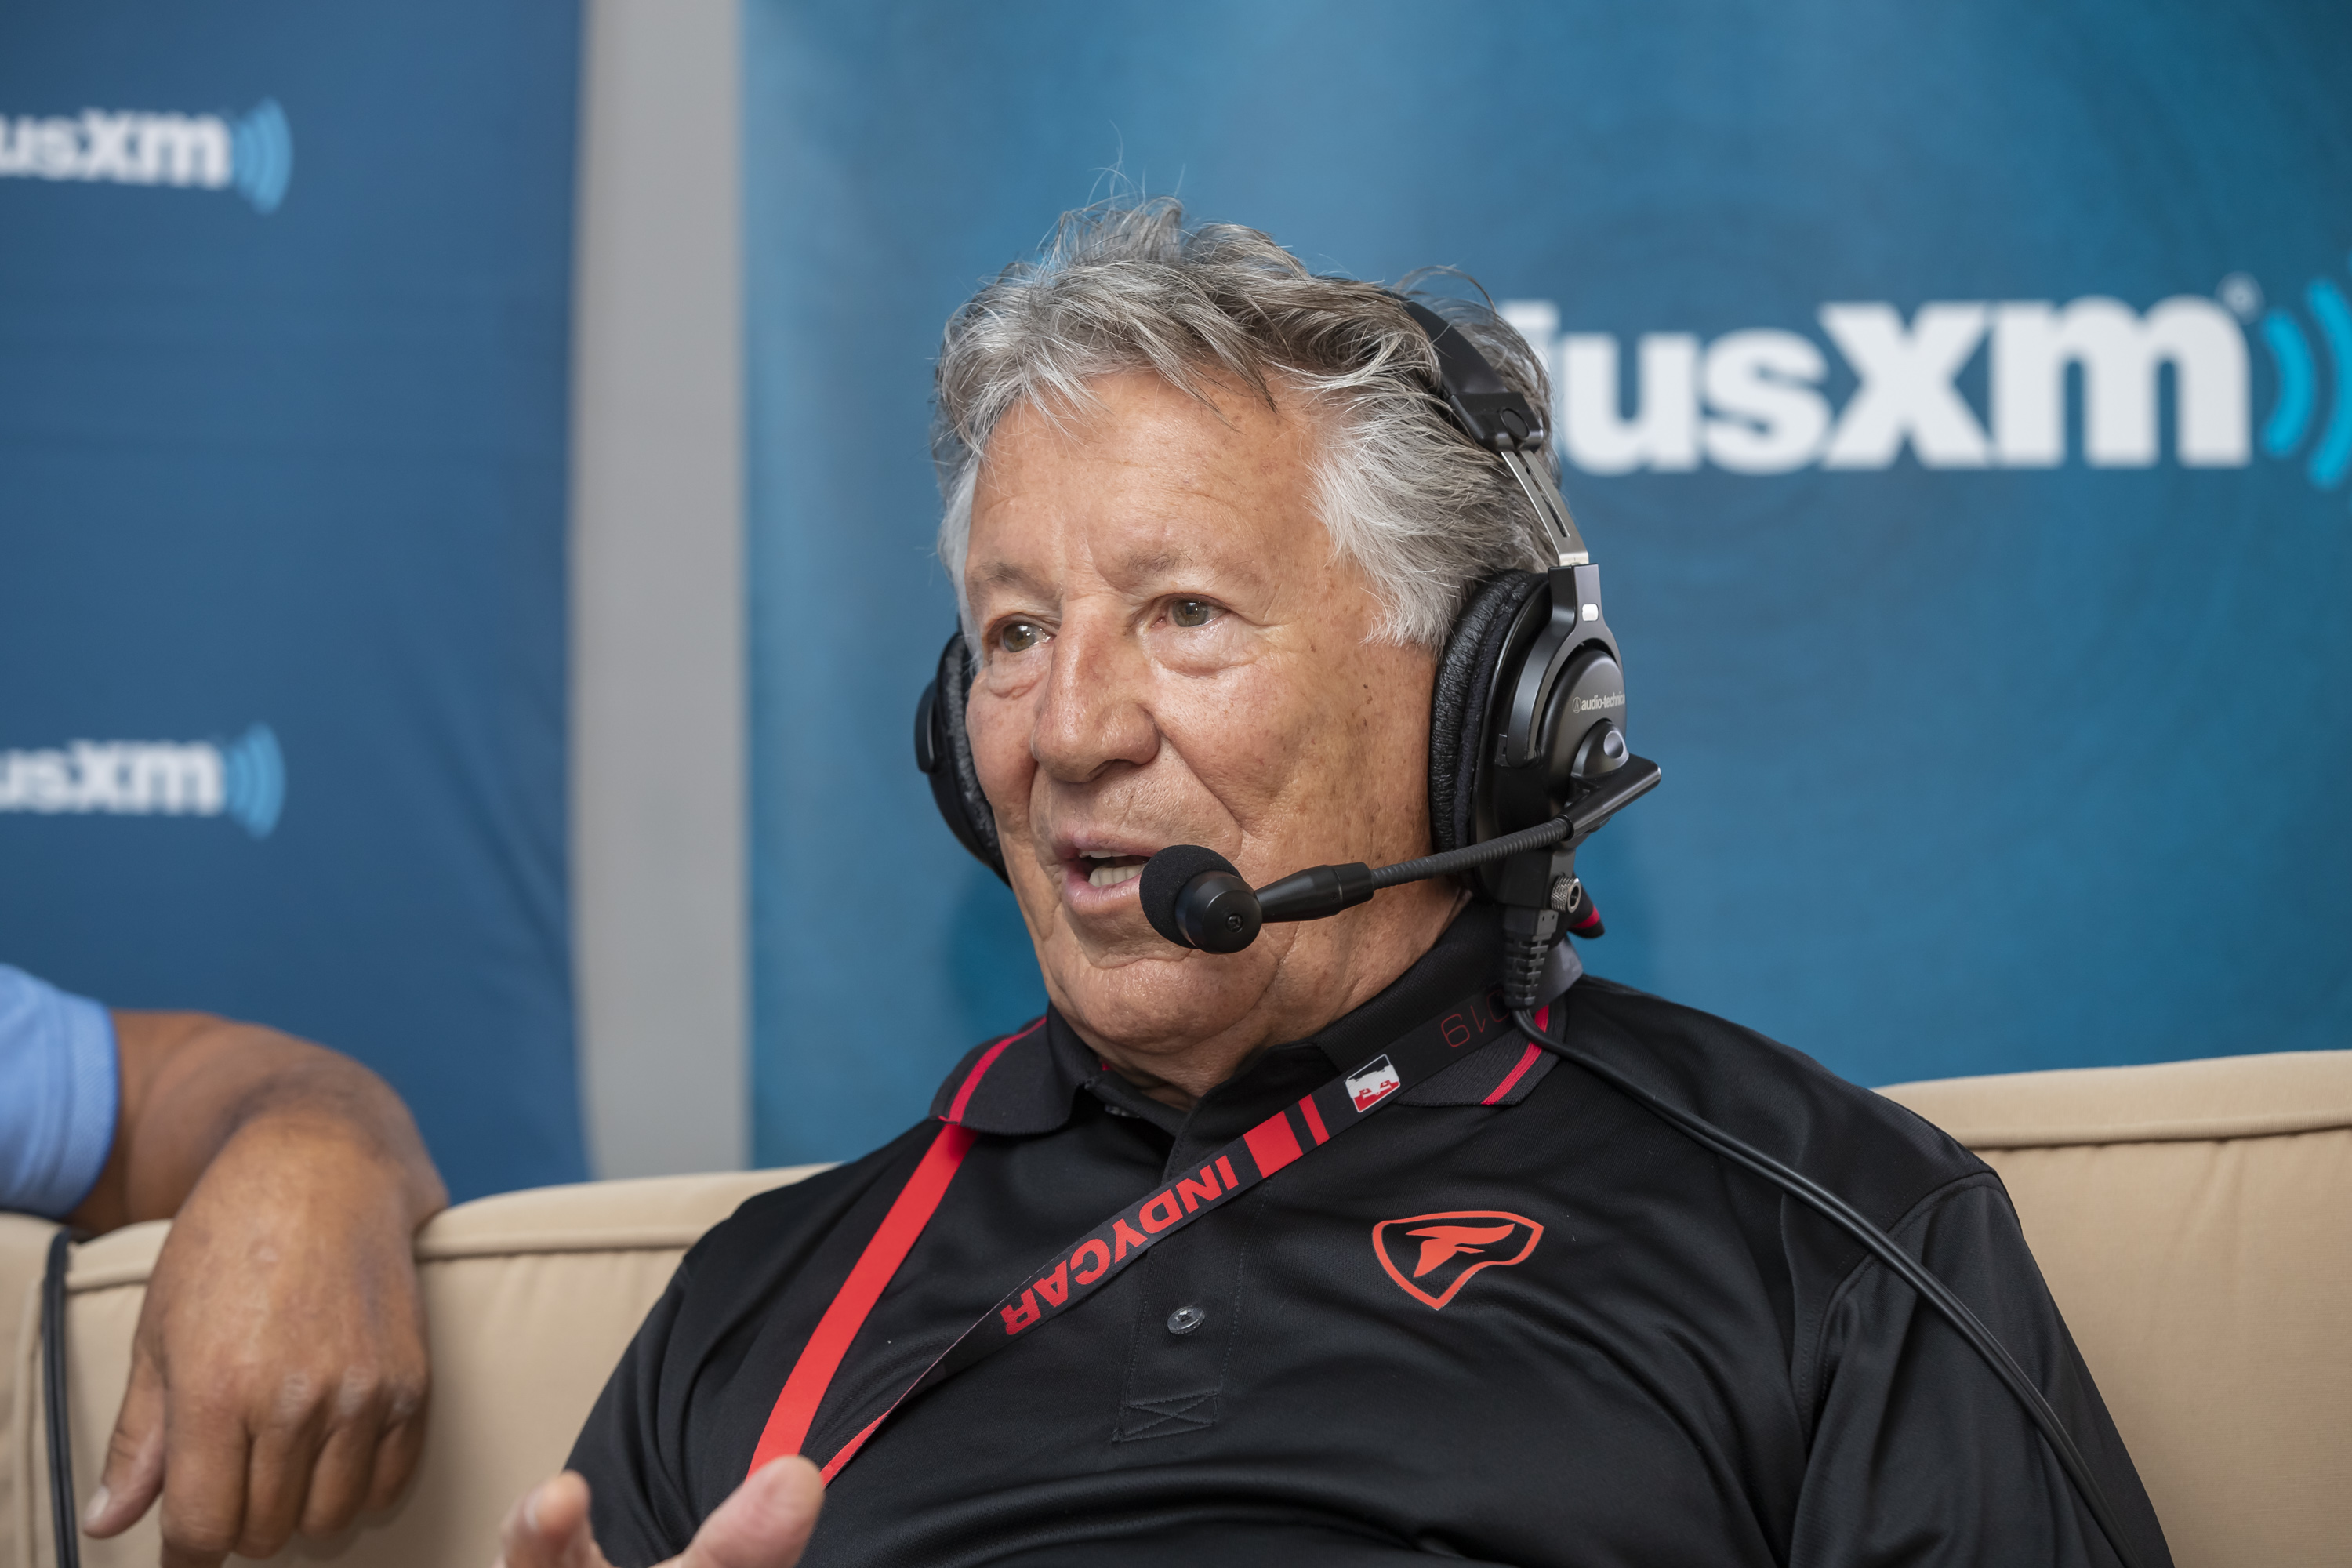 Mario Andretti could be considered the GOAT of racing. He's rooting for the GOAT of the NFL in Super Bowl 55.